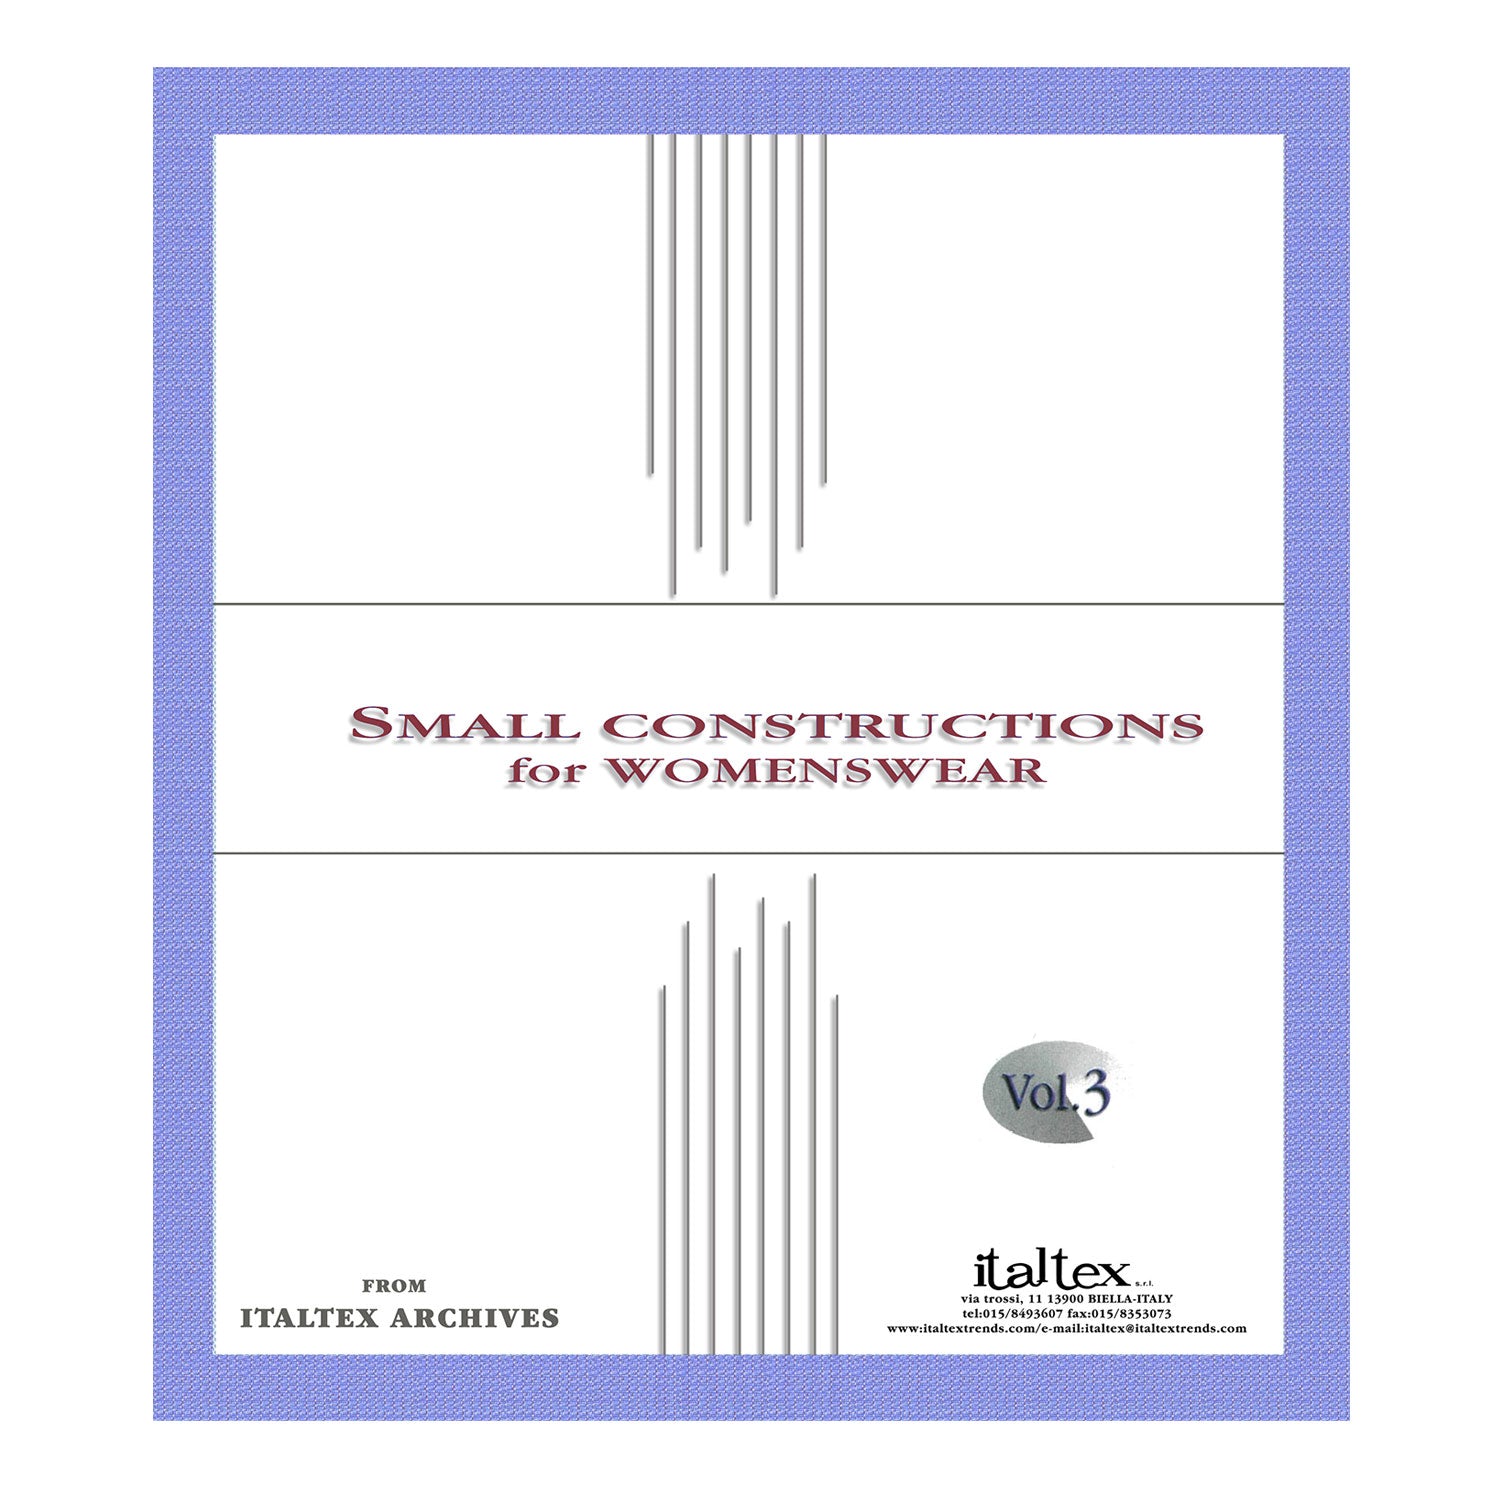 book cover of Italtex Small Contructions for Womenswear Volume 3. A white background. A purple blue frame inside which are the title: SMALL CONSTRUCTIONS for WOMENSWEAR in burgundy. FROM ITALTEX ARCHIVES written at the bottom left. Vol. 3 written on a grey background. Italtex address at the bottom right